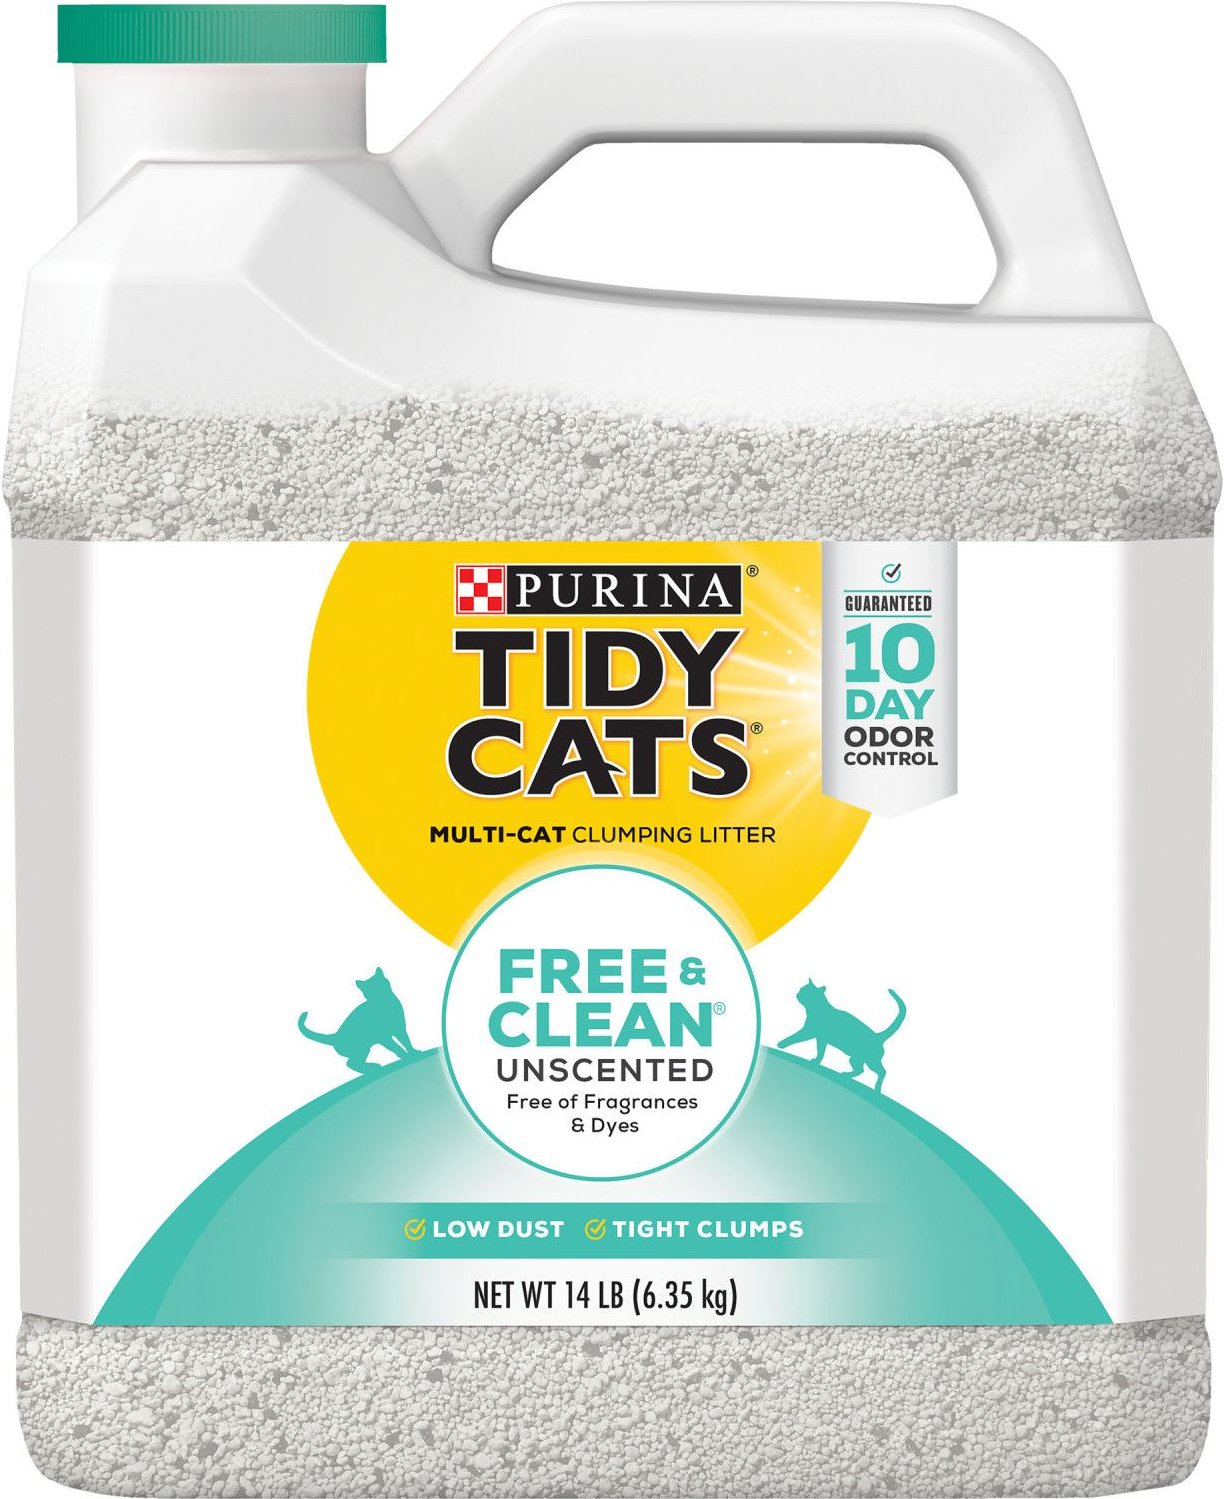 Tidy Cats Free & Clean Unscented Clumping Clay Cat Litter, 14lb jug